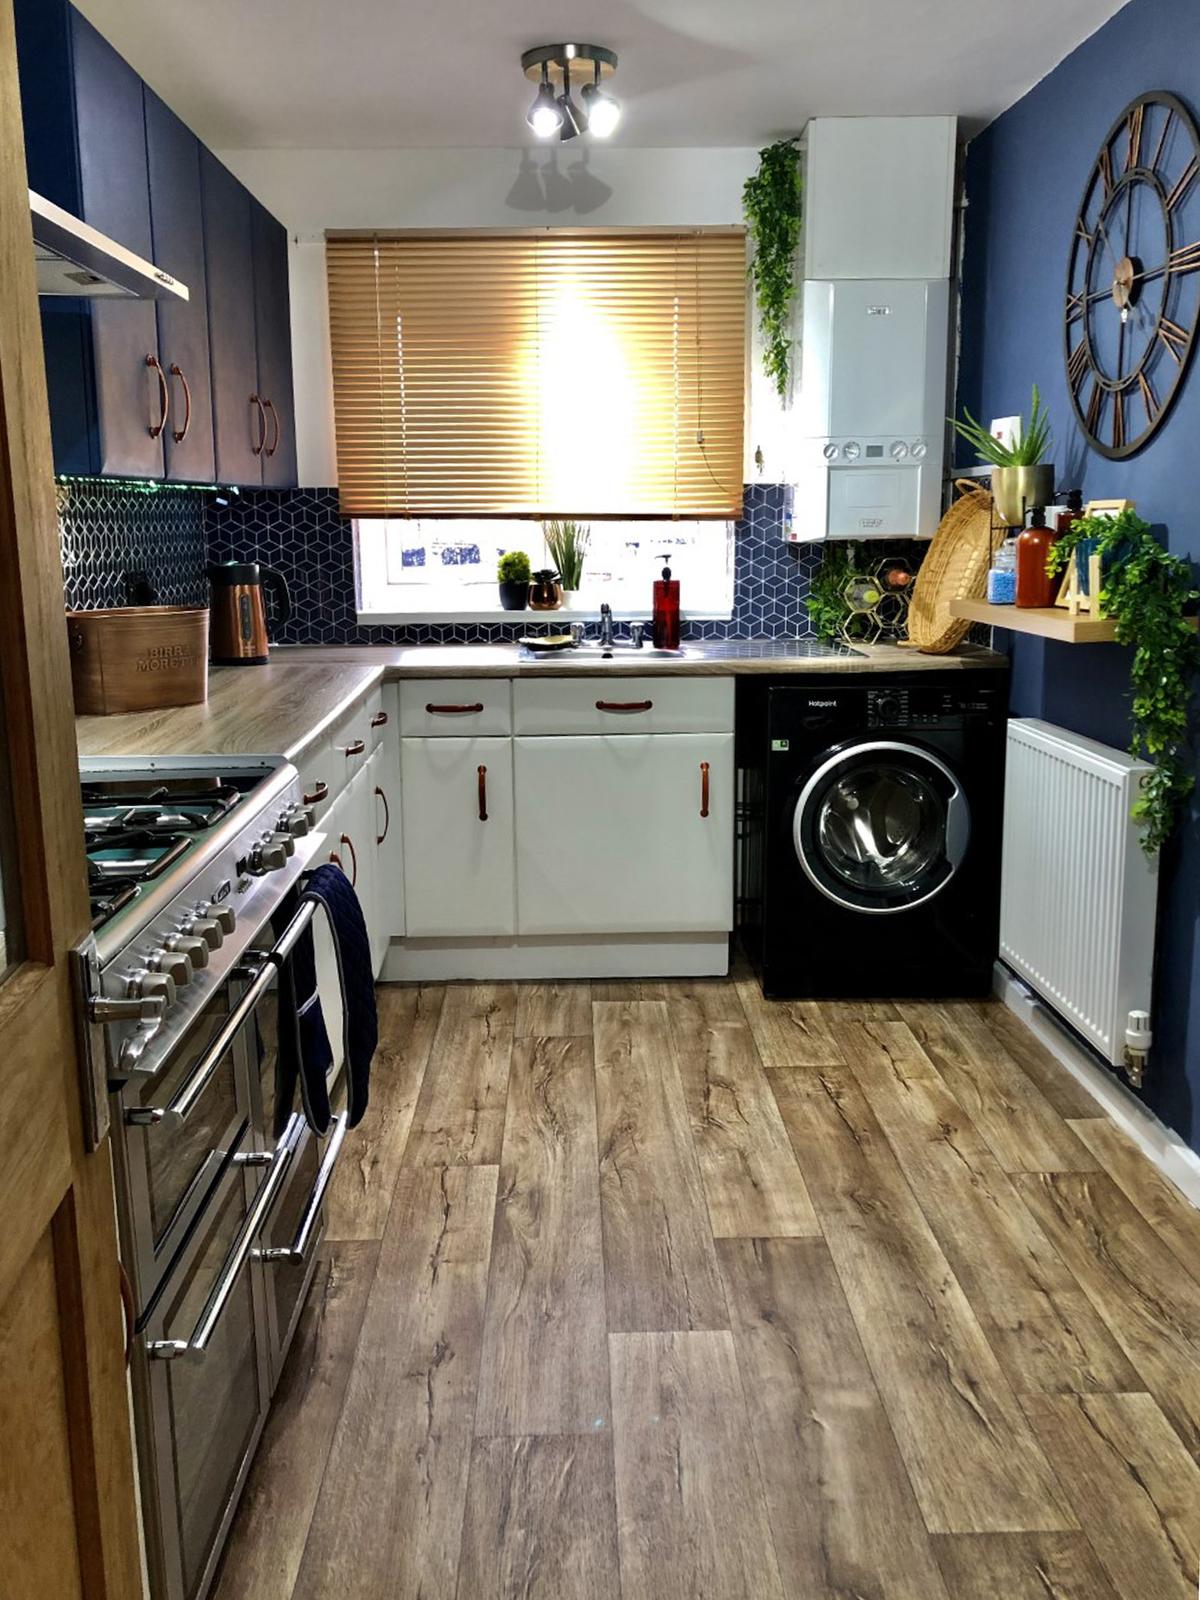 The kitchen after the renovation. (Caters News)